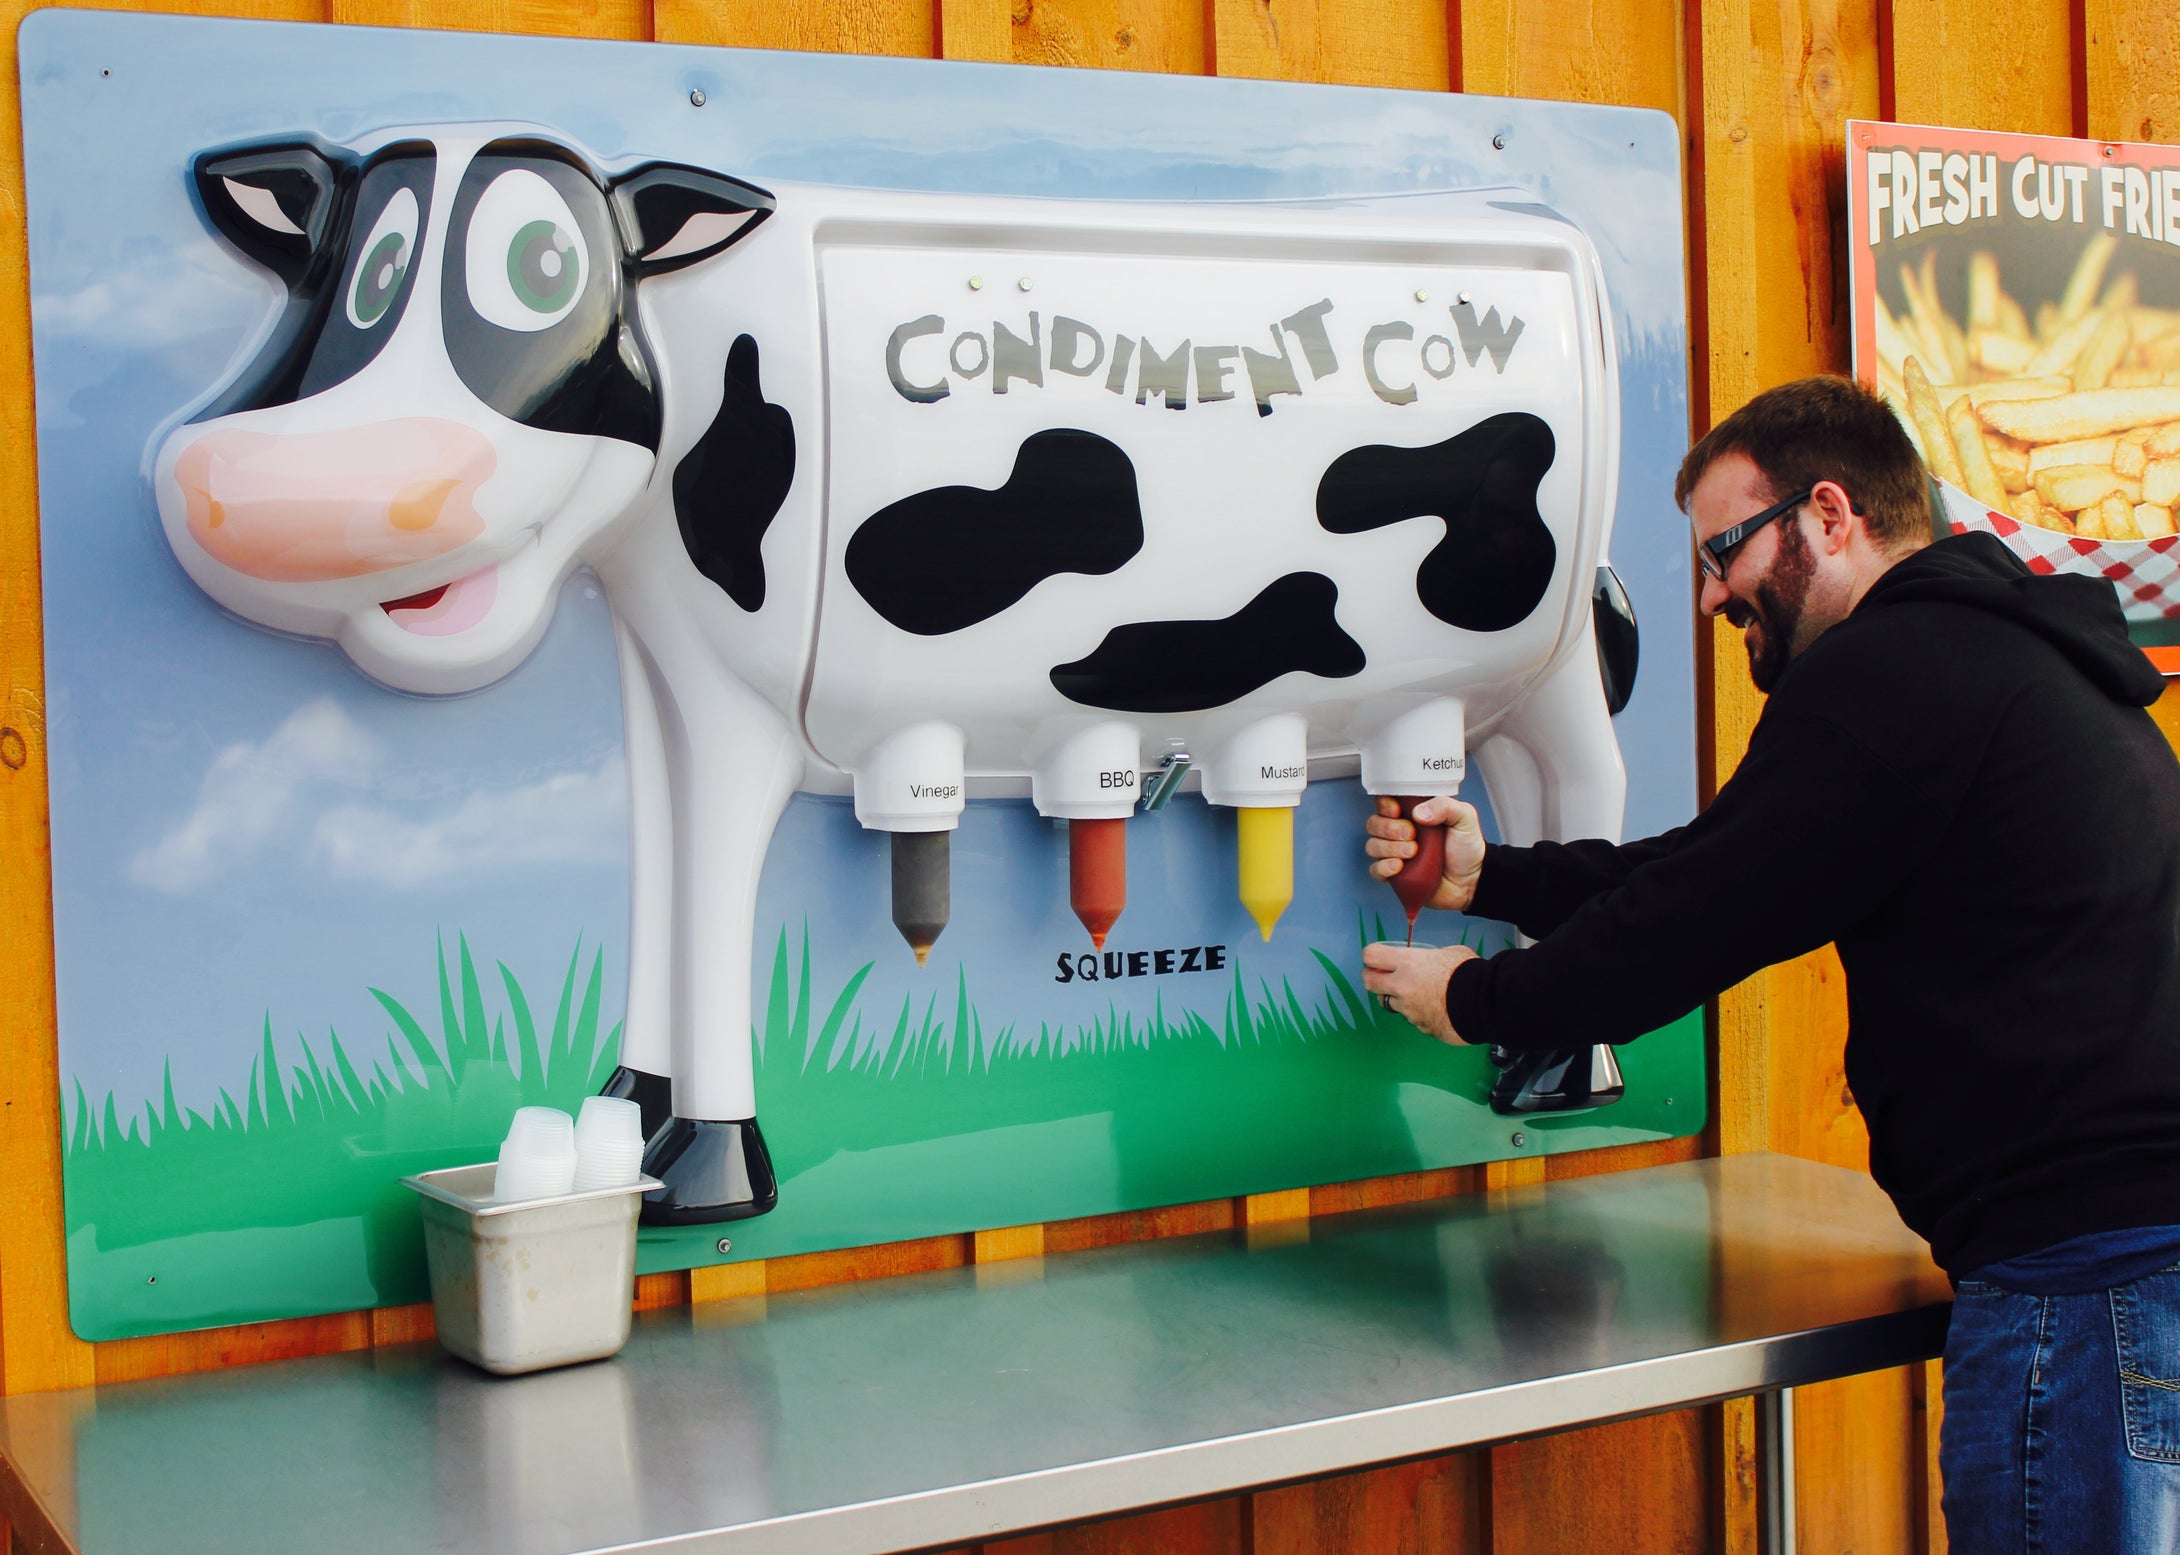 Take your condiment station to another level with the EZ-Dispenser inside of the Condiment Cow. Can hole 4 large EZ-Dispensers with different condiments. Each condiment co holds 640 oz. of condiments.